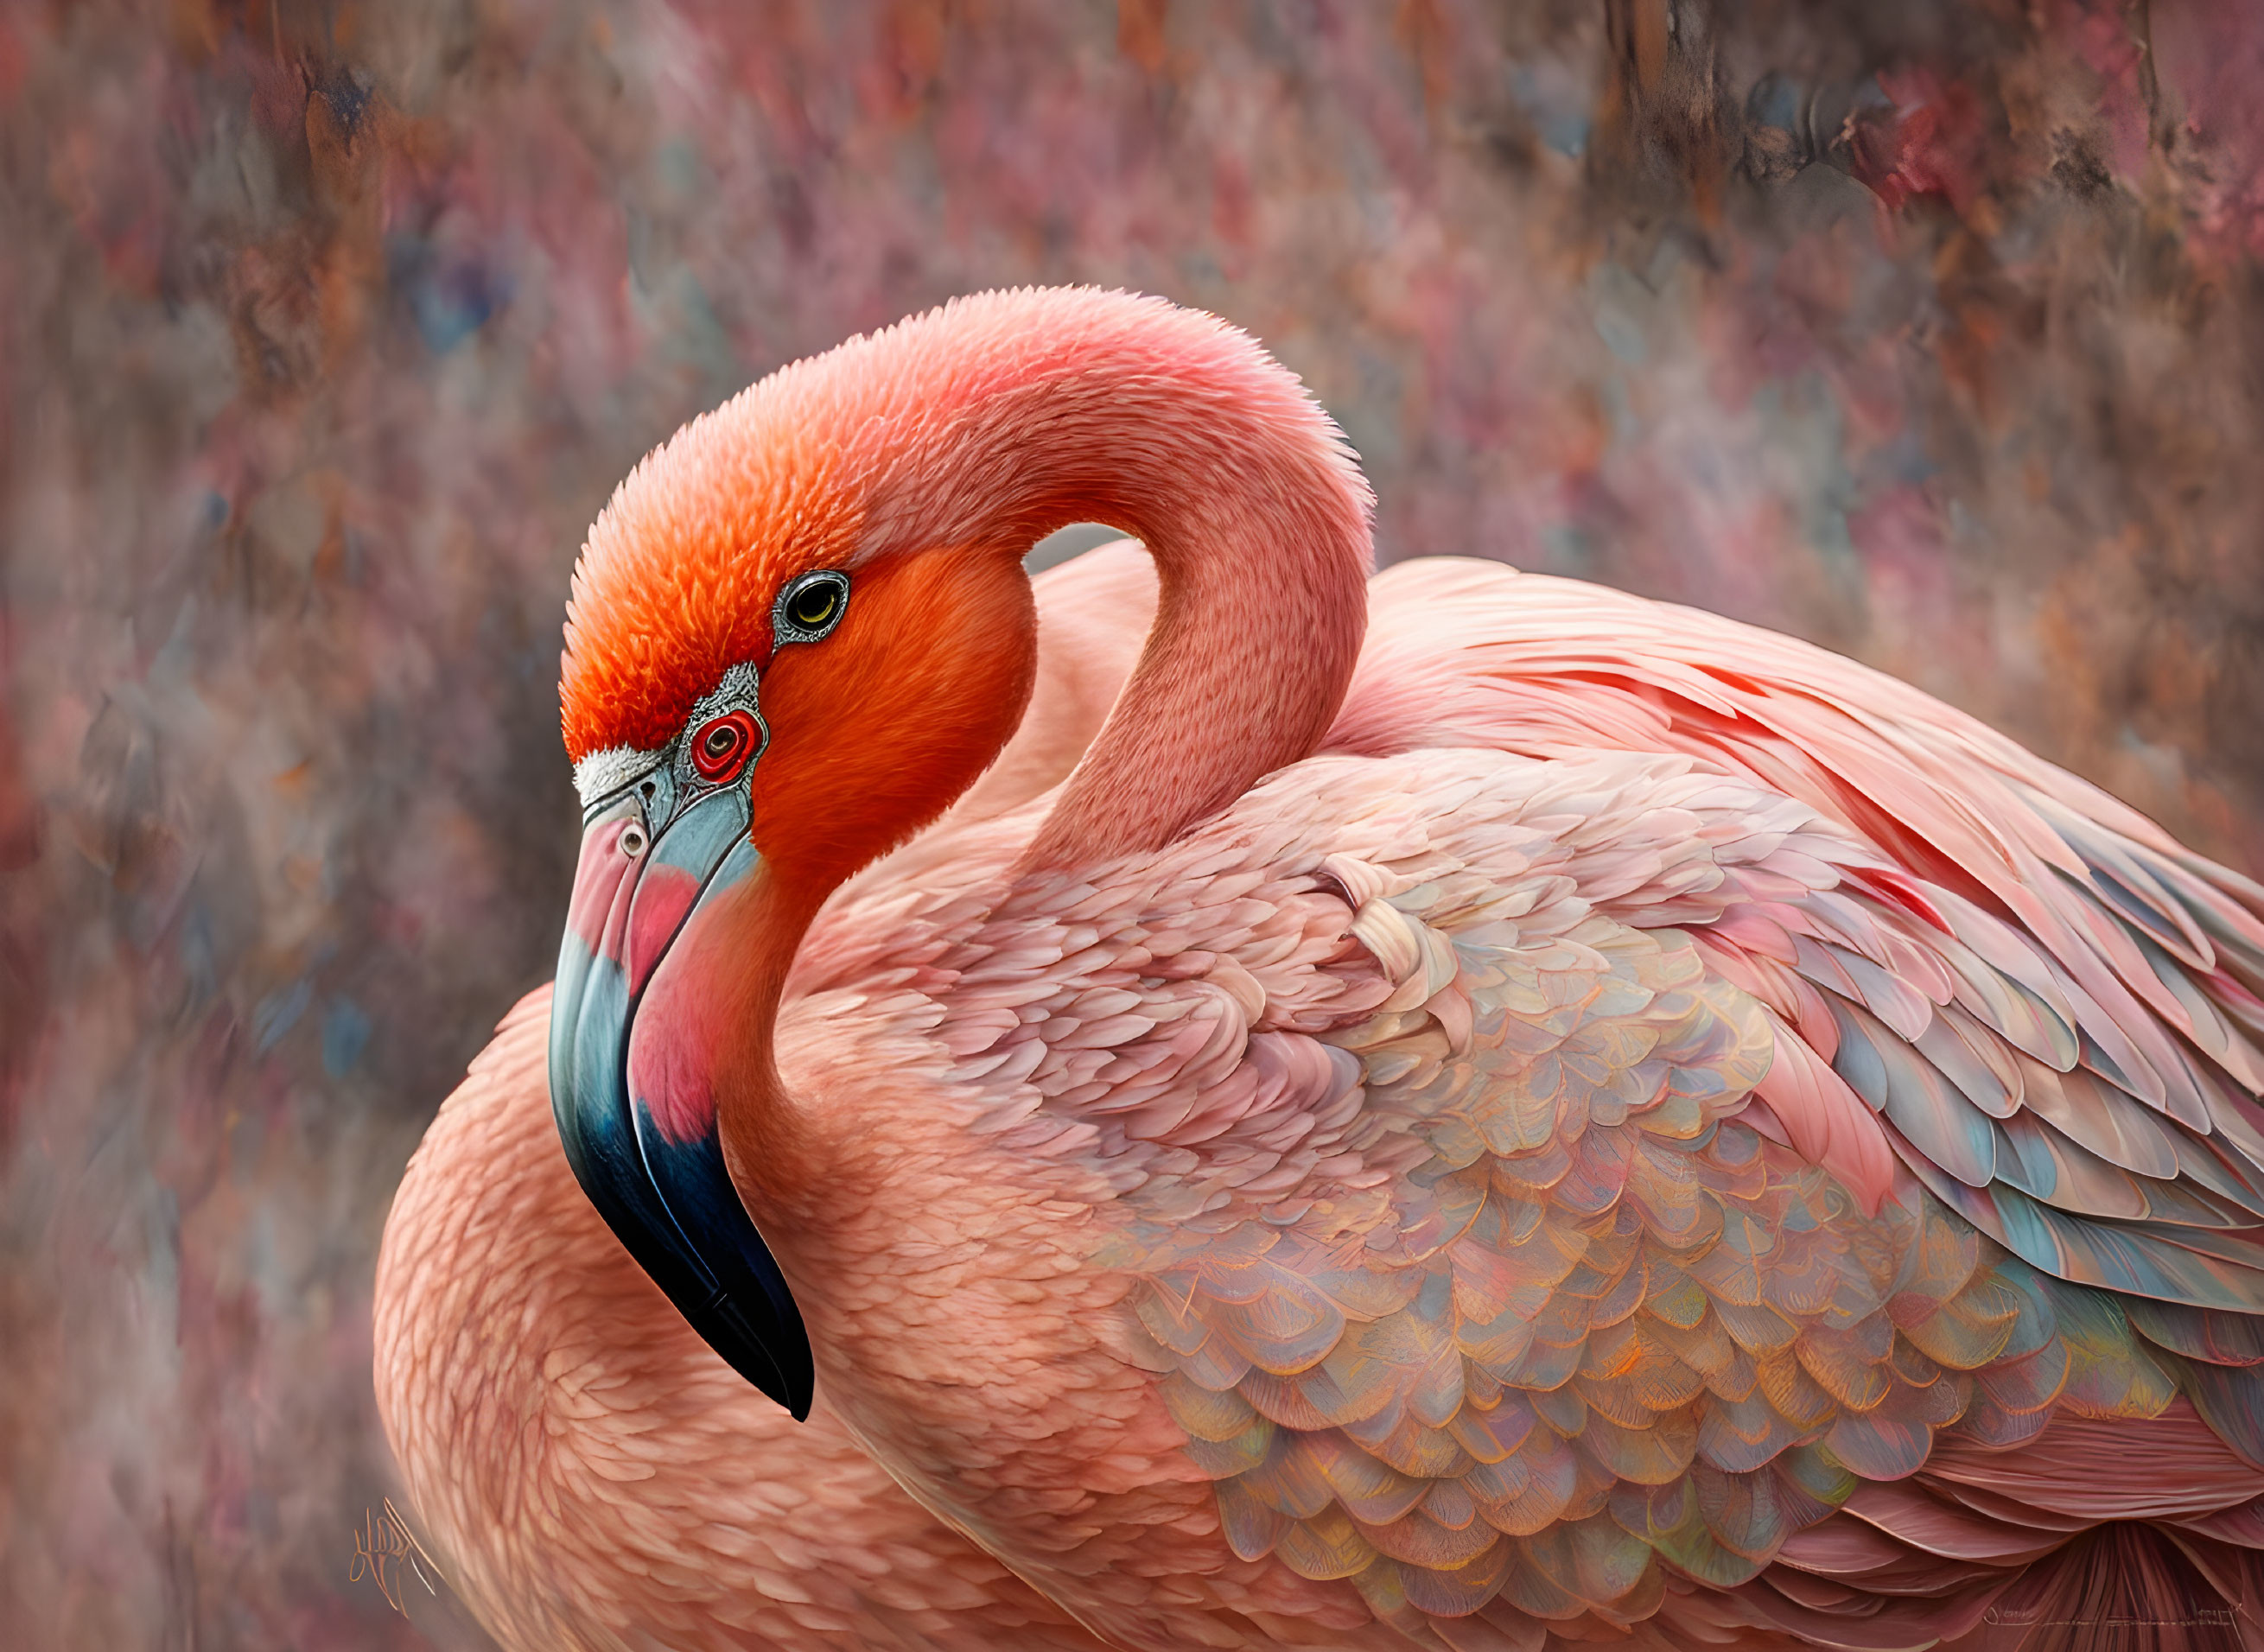 Detailed illustration of vibrant flamingo feathers and bill on mottled background